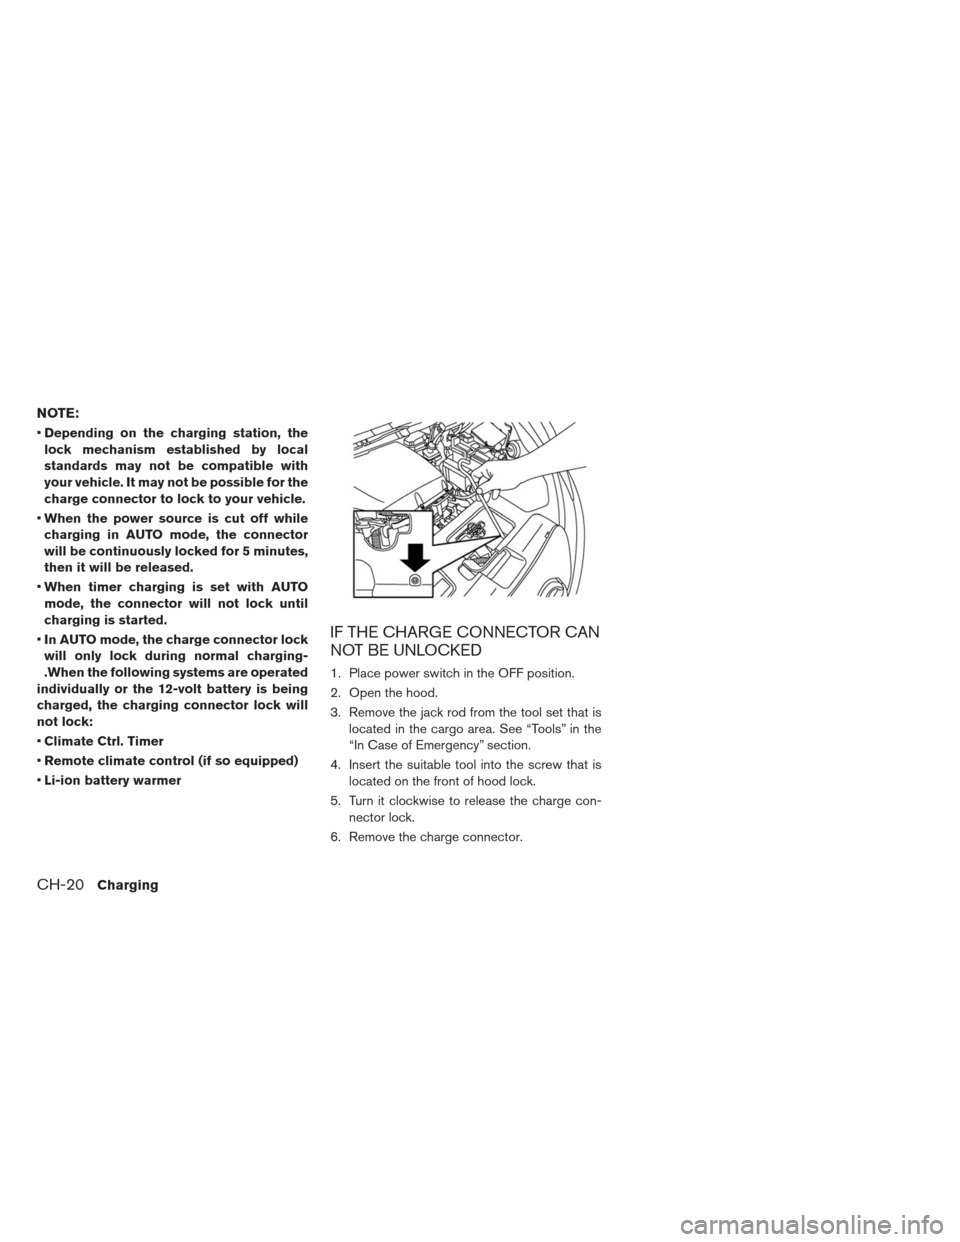 NISSAN LEAF 2013 1.G Repair Manual NOTE:
Depending on the charging station, the
lock mechanism established by local
standards may not be compatible with
your vehicle. It may not be possible for the
charge connector to lock to your vehi